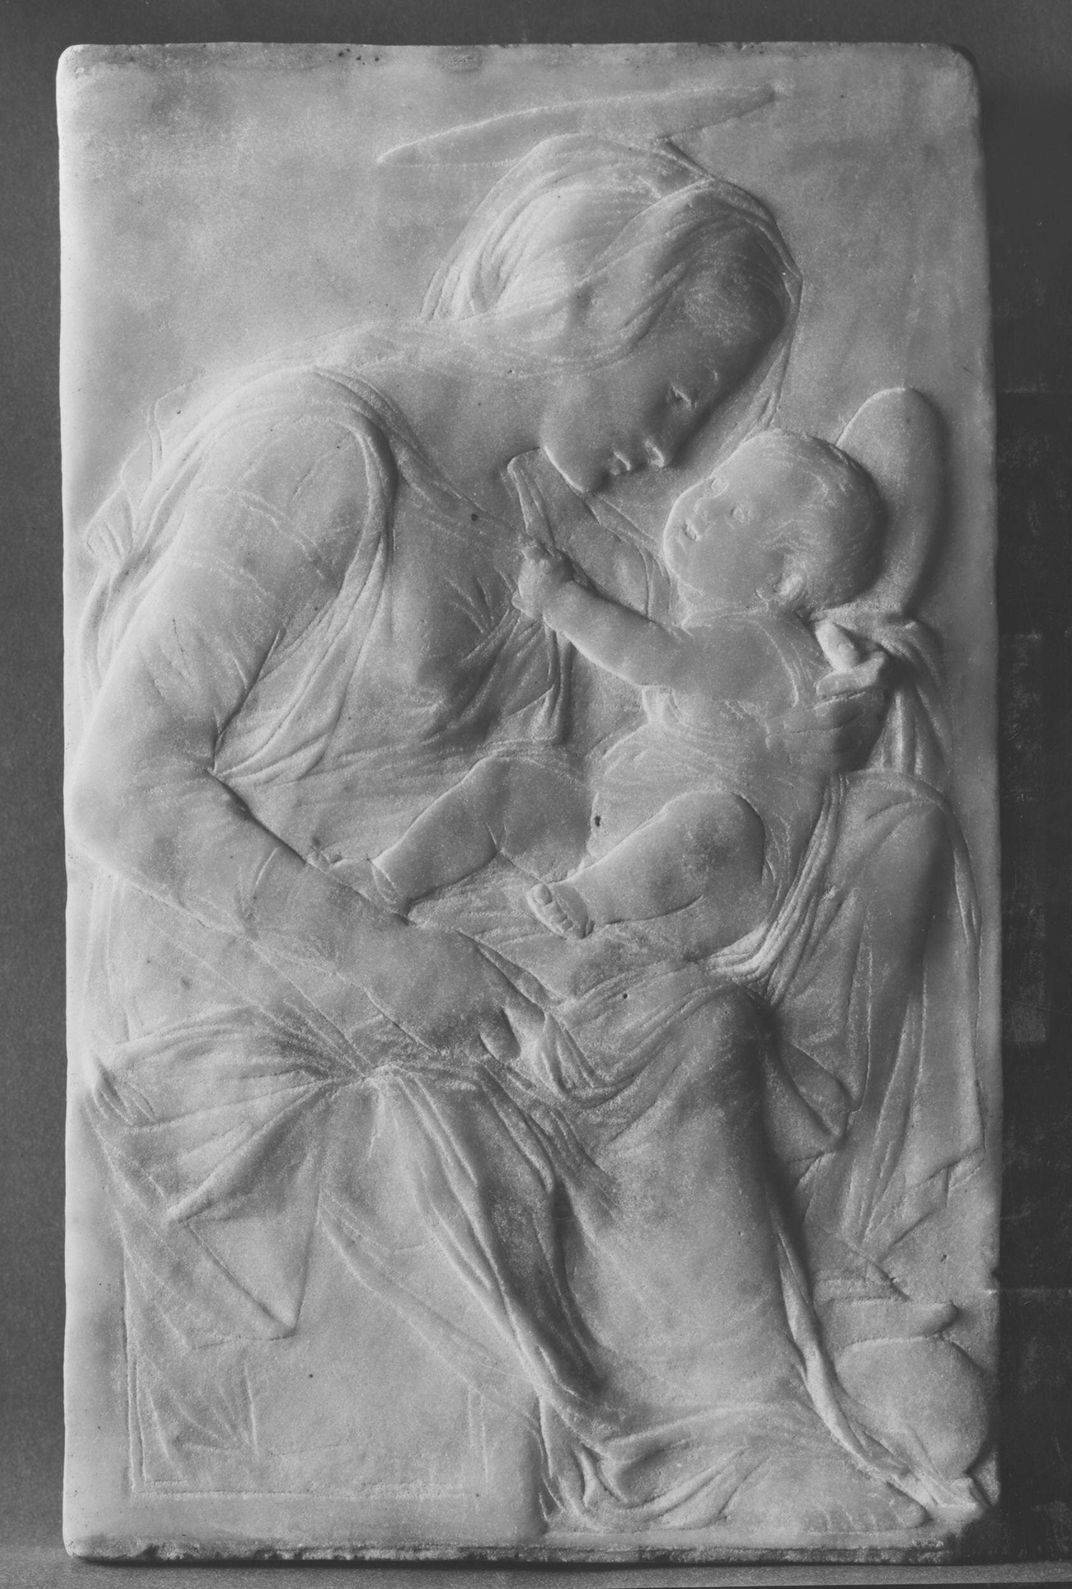 A black and white image of a carved relief of a mother holding a baby with a halo